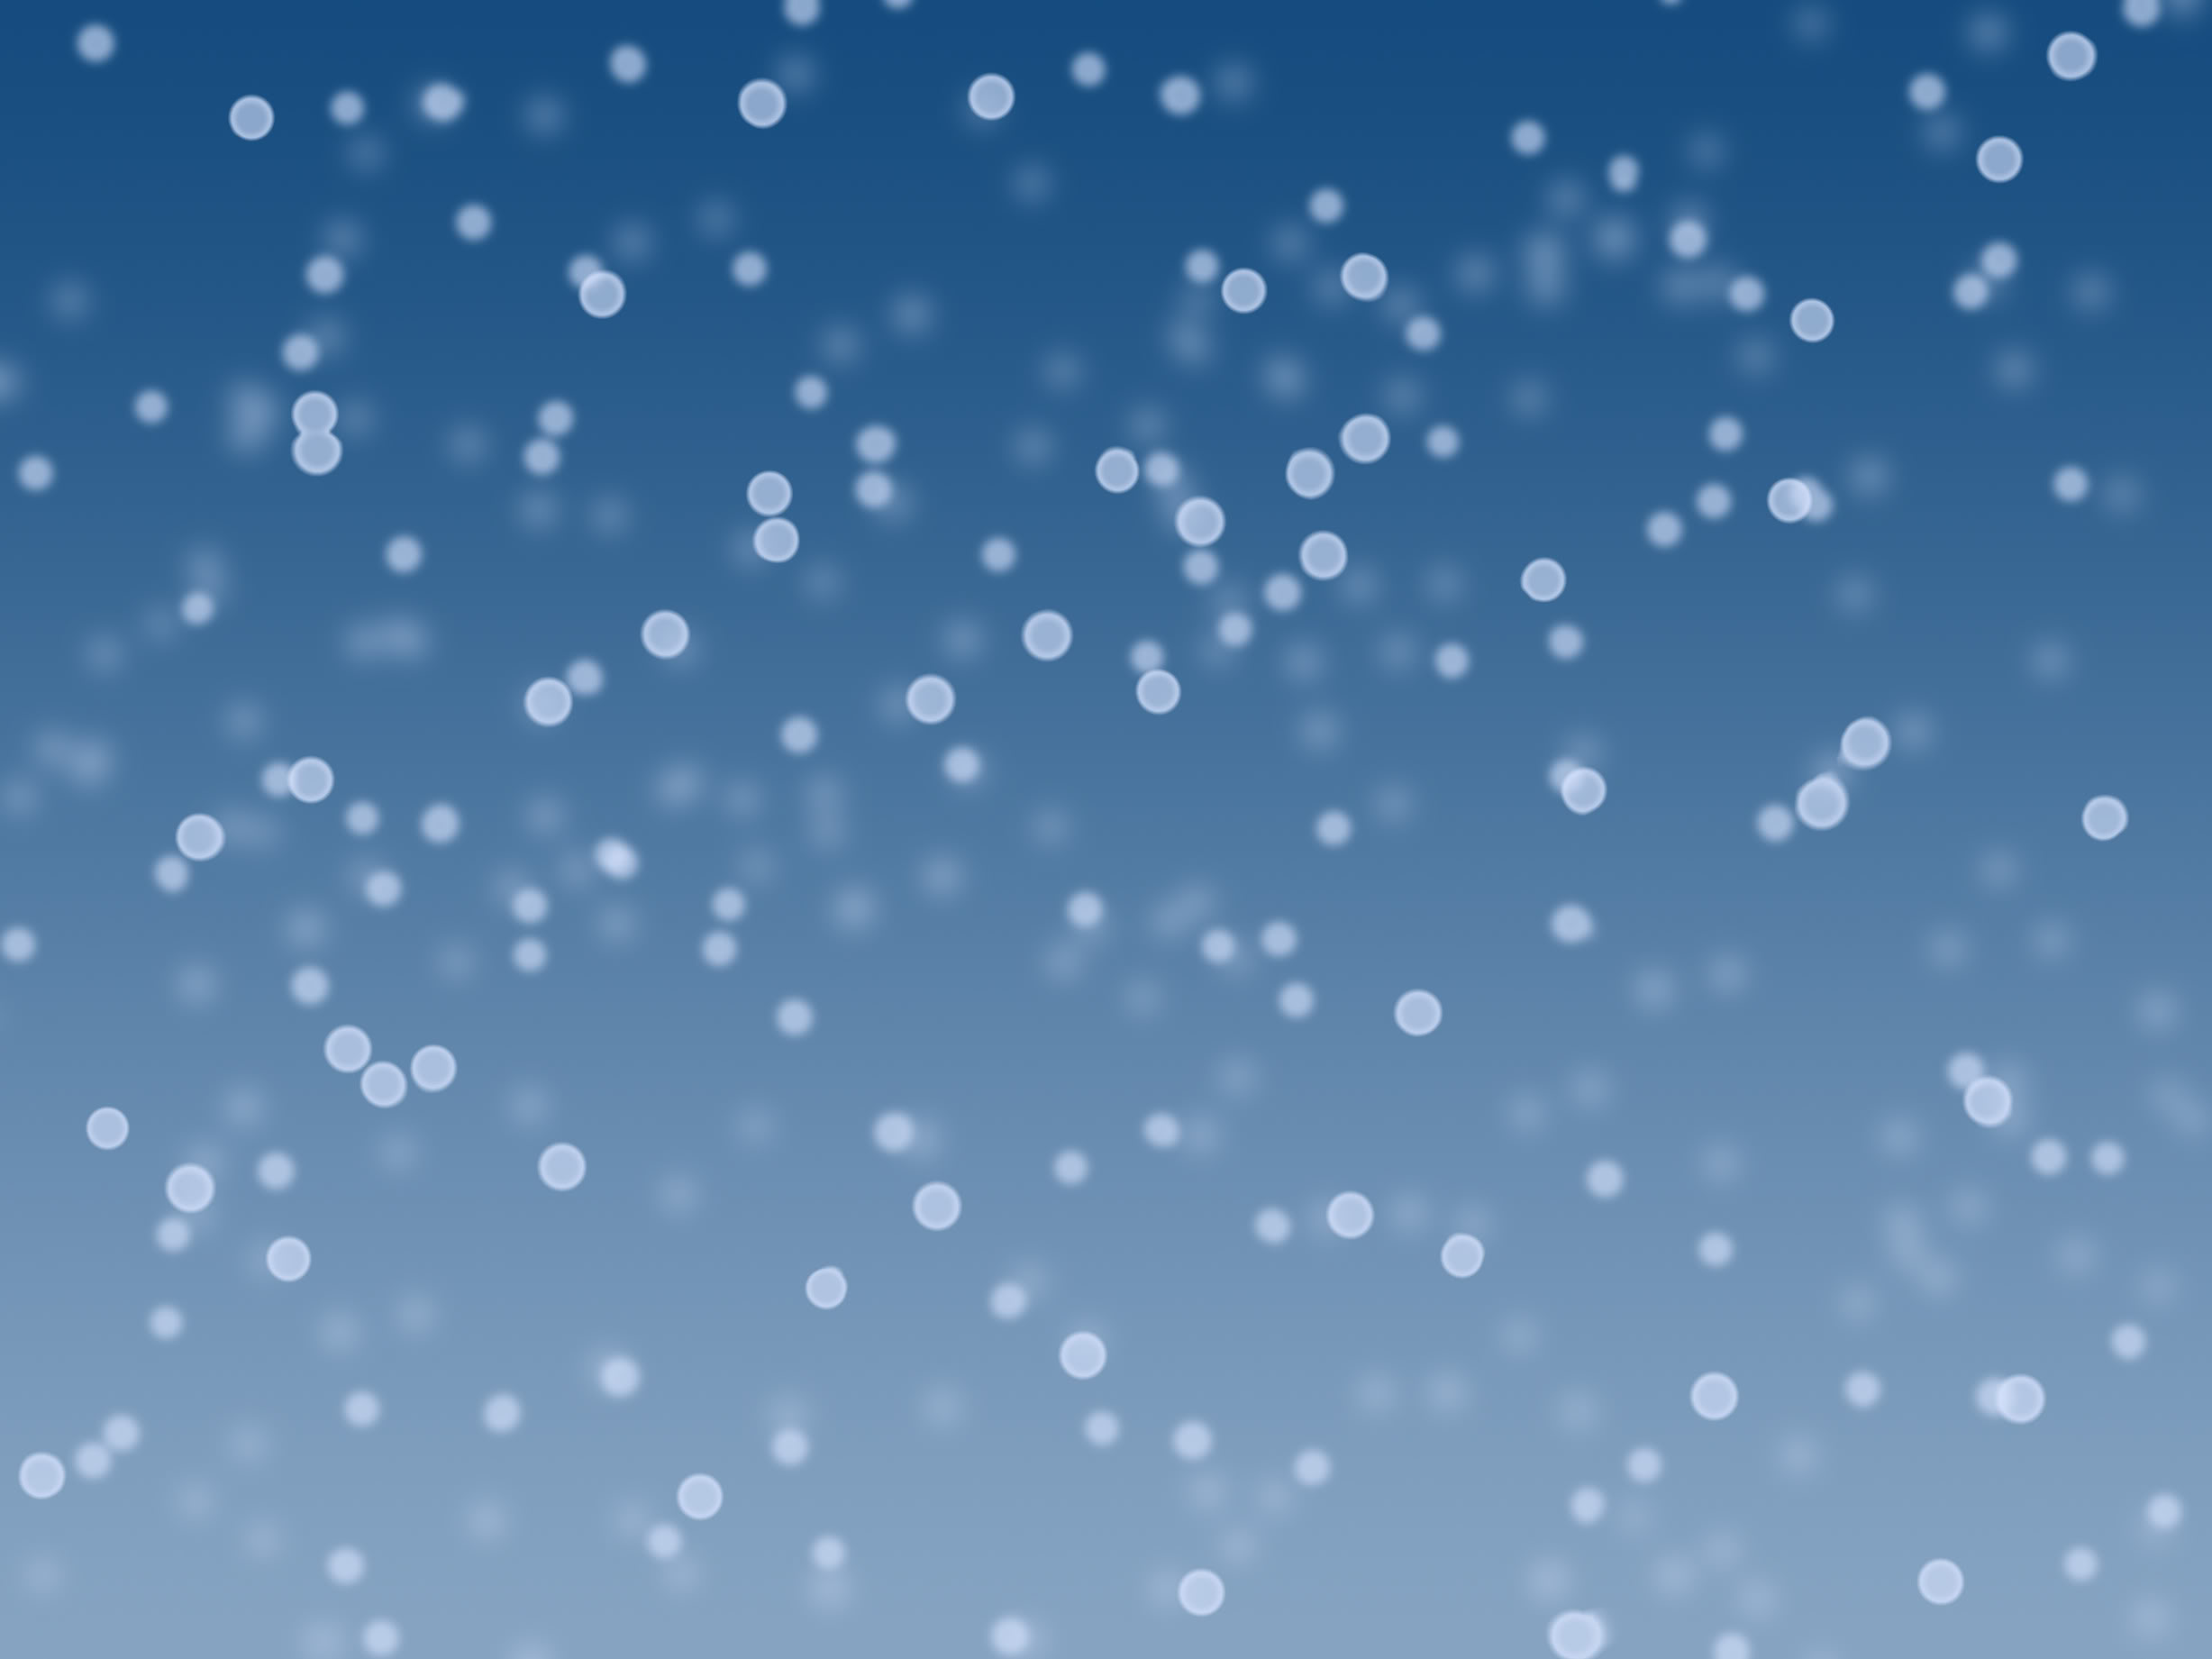 clipart of snow falling - photo #37